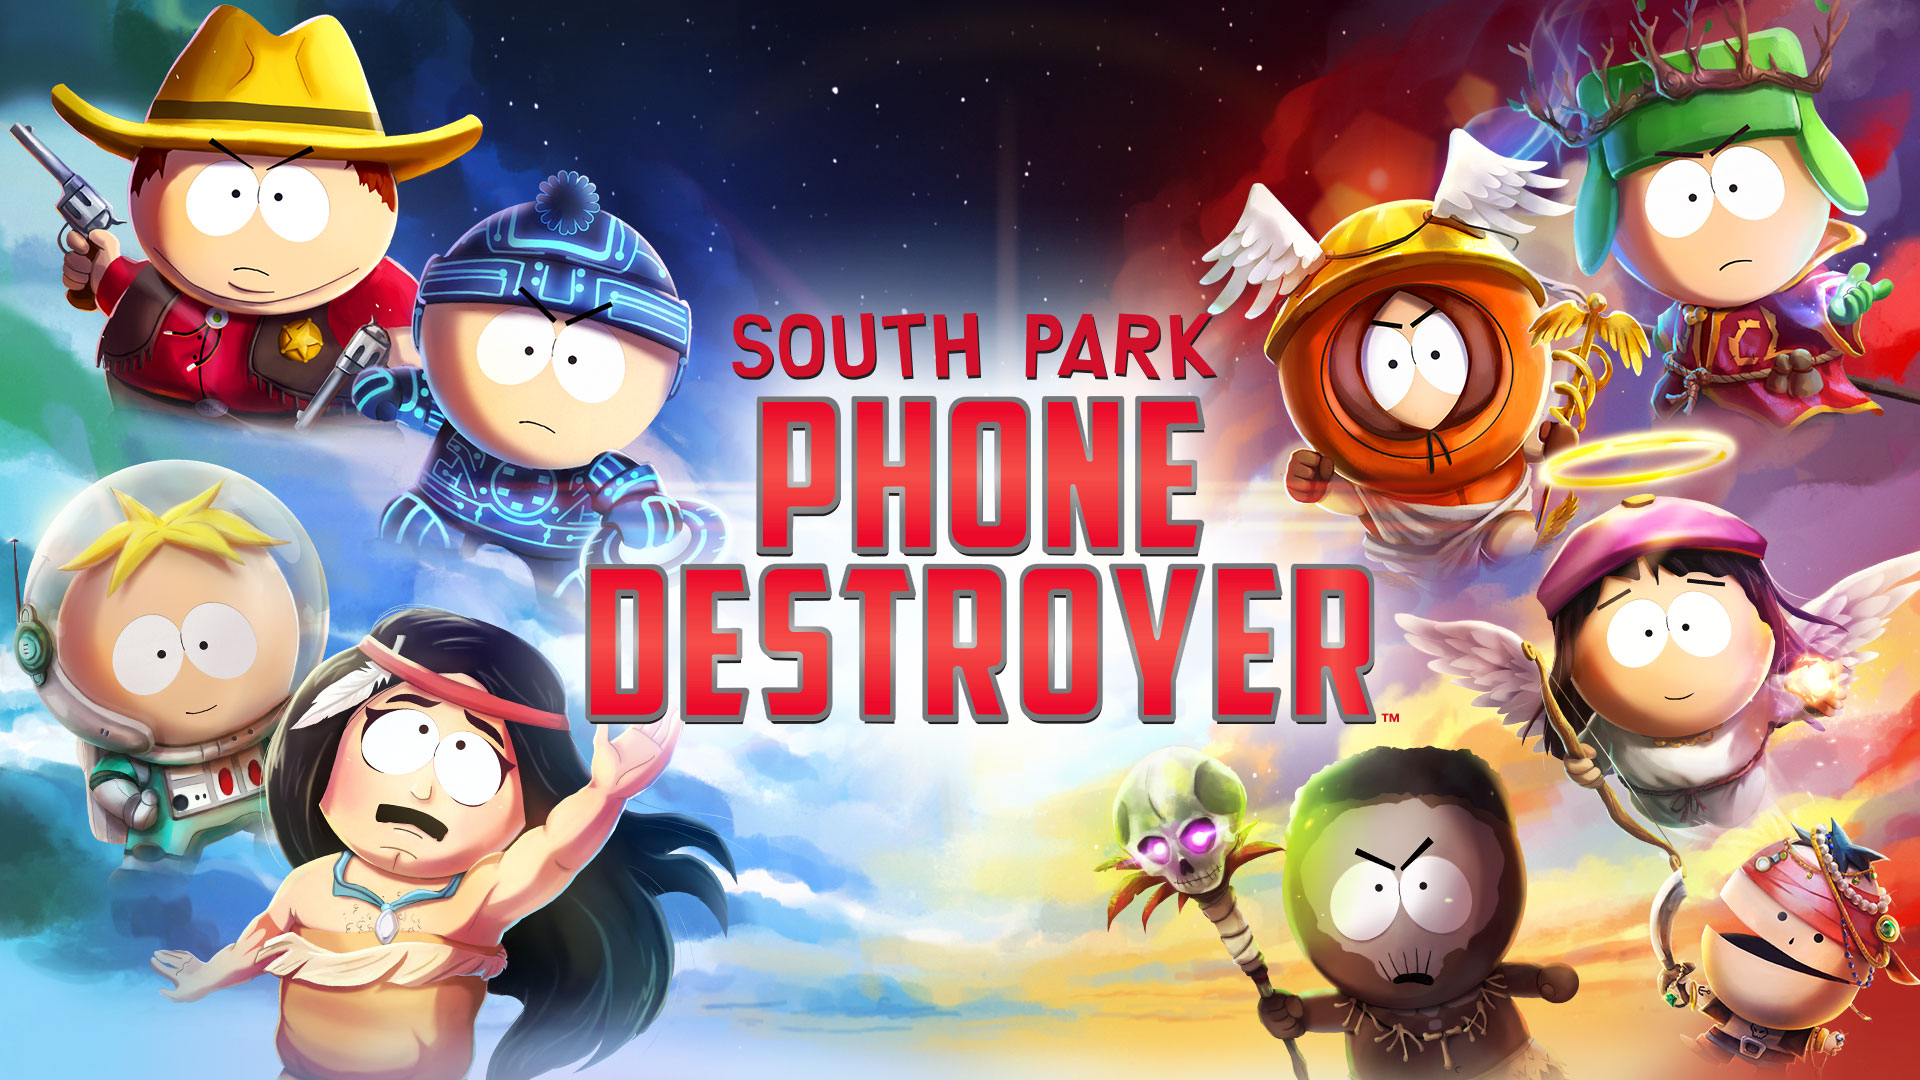 Video Game South Park: Phone Destroyer HD Wallpaper | Background Image